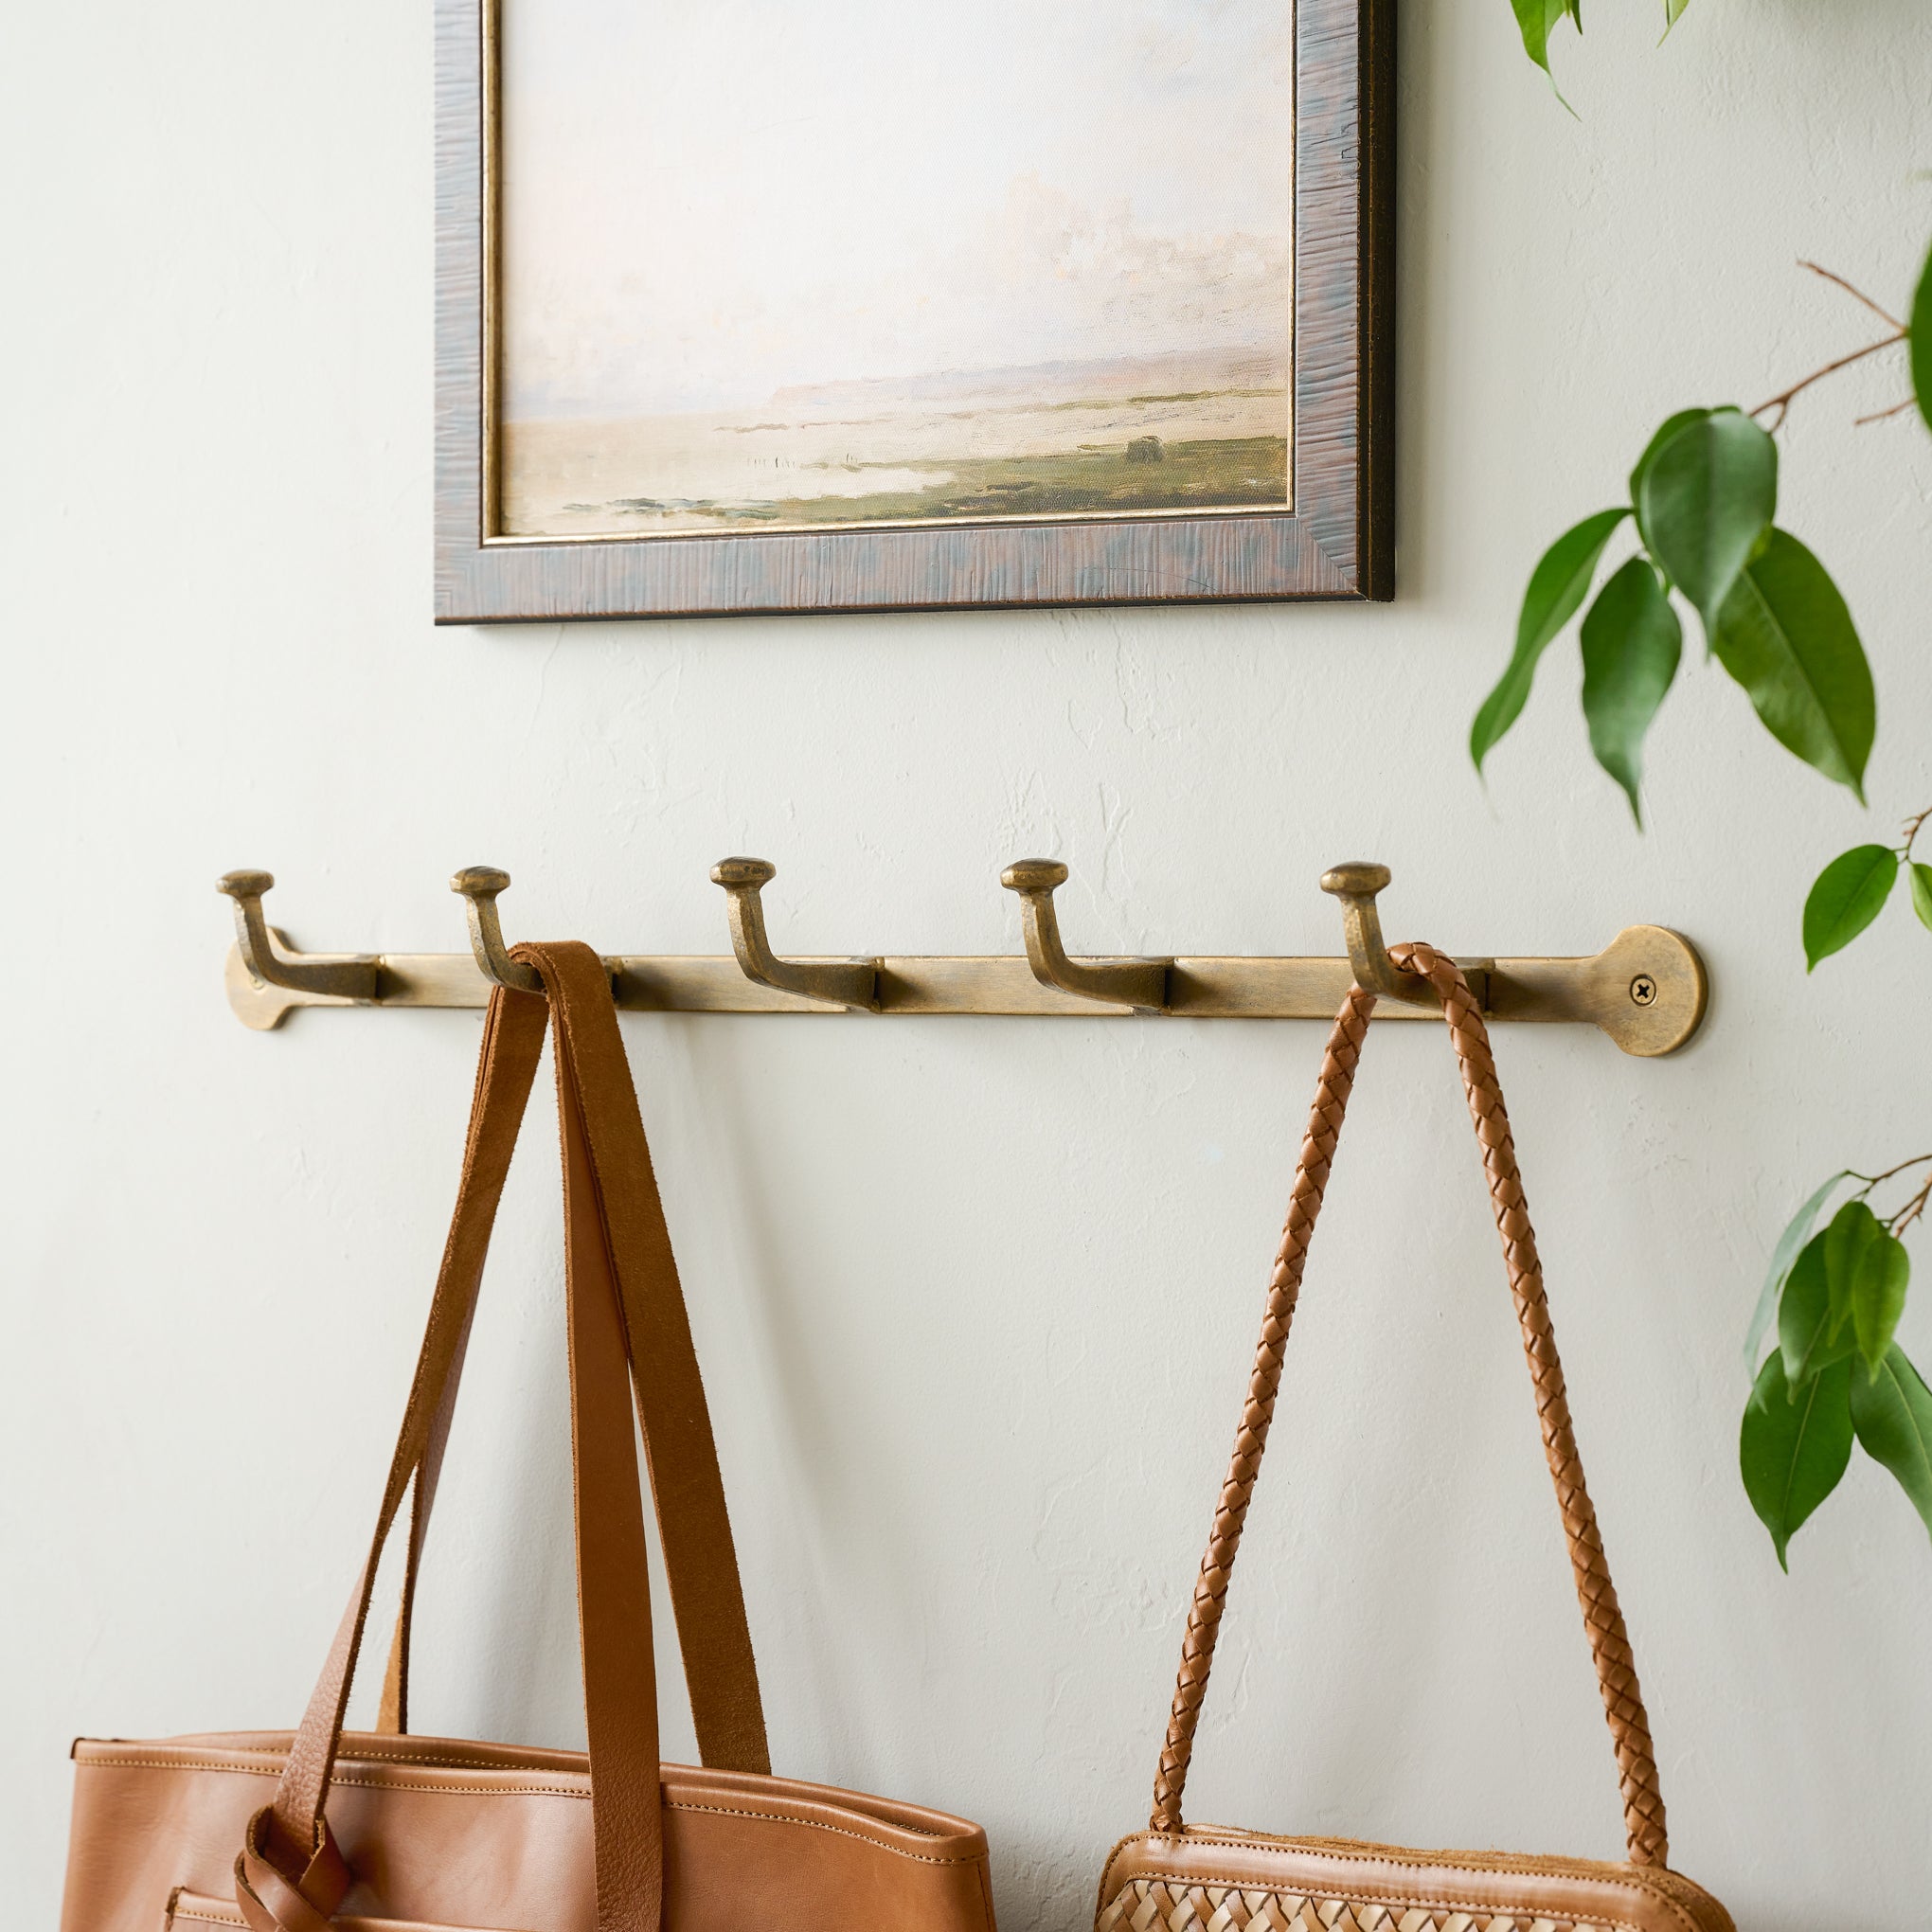 Hammered Iron Wall Hooks with purses hanging from hooks Items range from $28.00 to $38.00